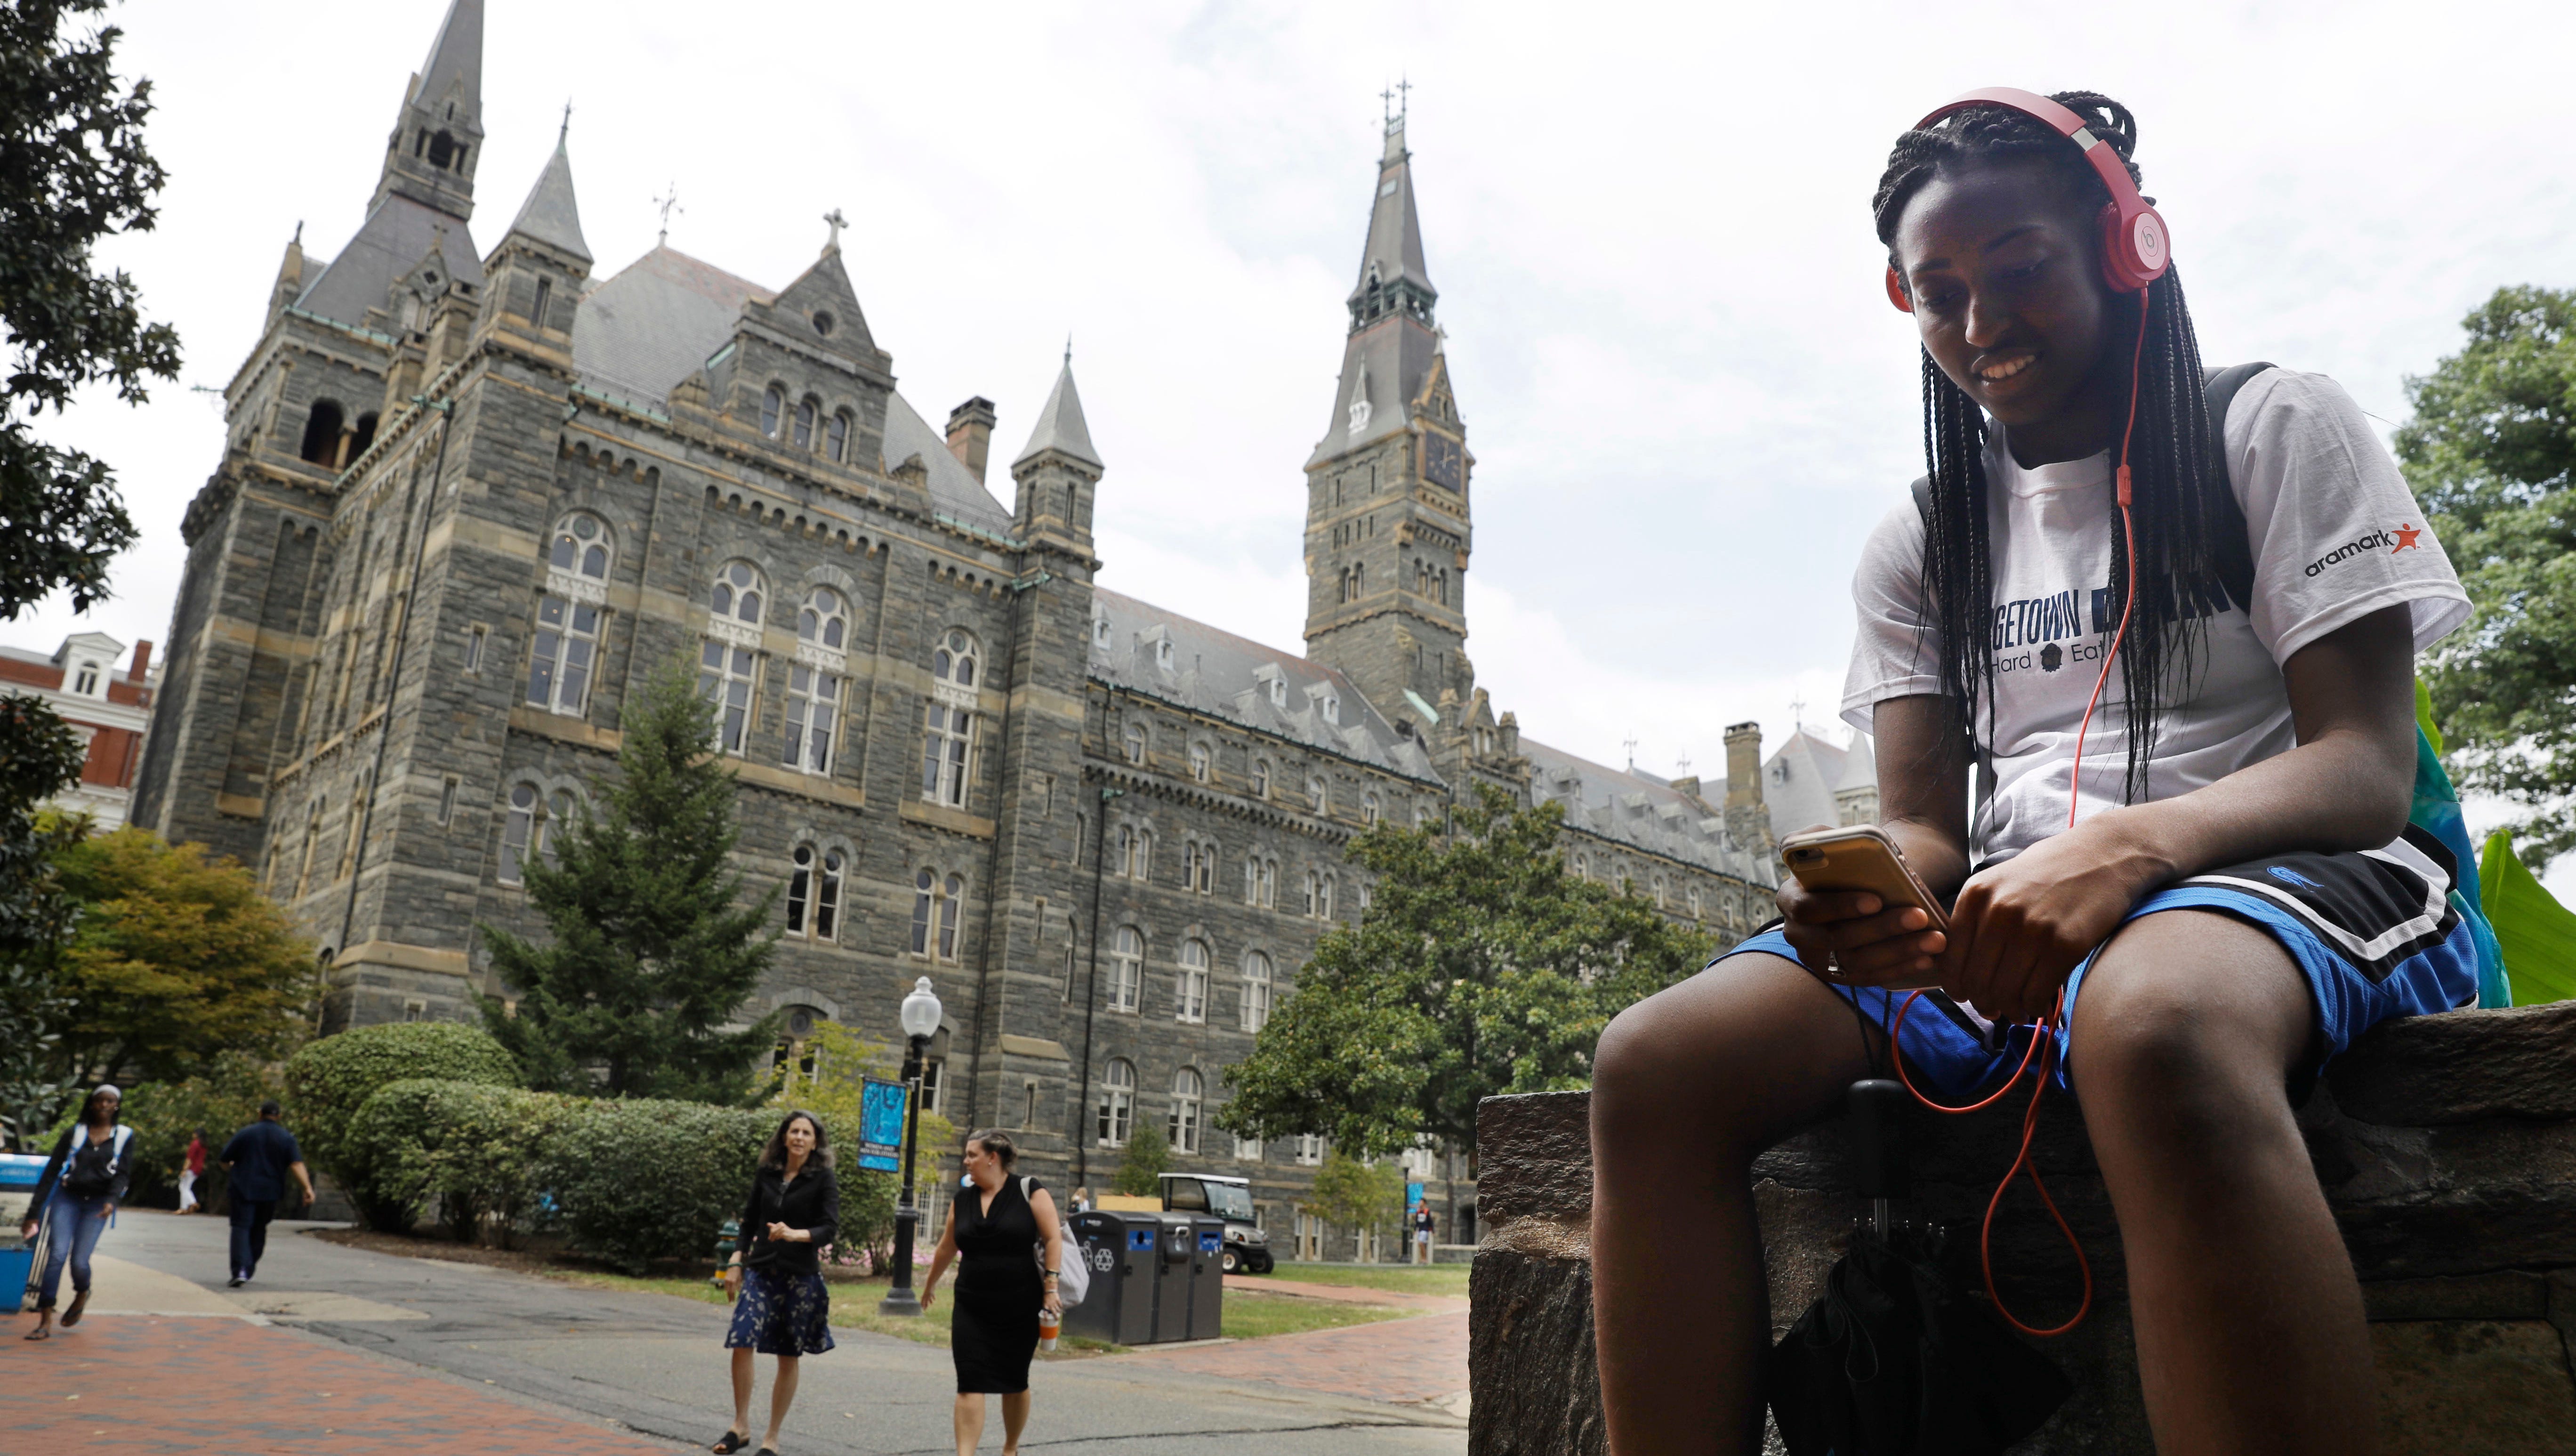 Deja Lindsey, 20, a junior at Georgetown University, talks on her cell phone in front of Healy Hall on campus, Thursday, Sept. 1, 2016, in Washington. After renaming the Mulledy and McSherry buildings at Georgetown University temporarily to Freedom Hall and Remembrance Hall, Georgetown University will give preference in admissions to the descendants of slaves owned by the Maryland Jesuits as part of its effort to atone for profiting from the sale of enslaved people. Georgetown president John DeGioia announced Thursday that the university will implement the admissions preferences. The university released a report calling on its leaders to offer a formal apology for the university's participation in the slave trade.  (AP Photo/Jacquelyn Martin)